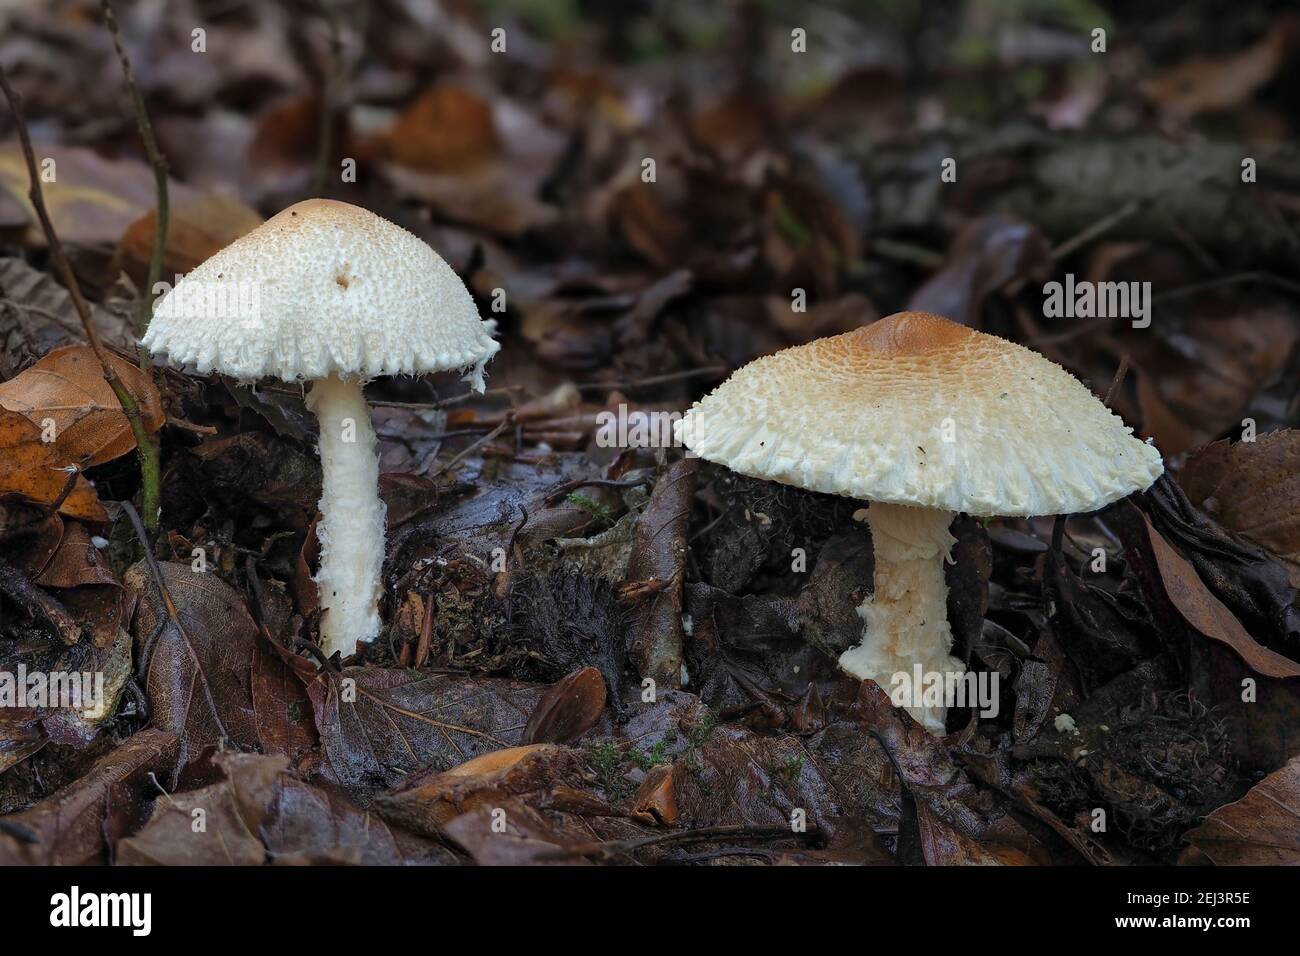 The Shield Dapperling (Lepiota clypeolaria) is a poisonous mushroom , an intresting photo Stock Photo